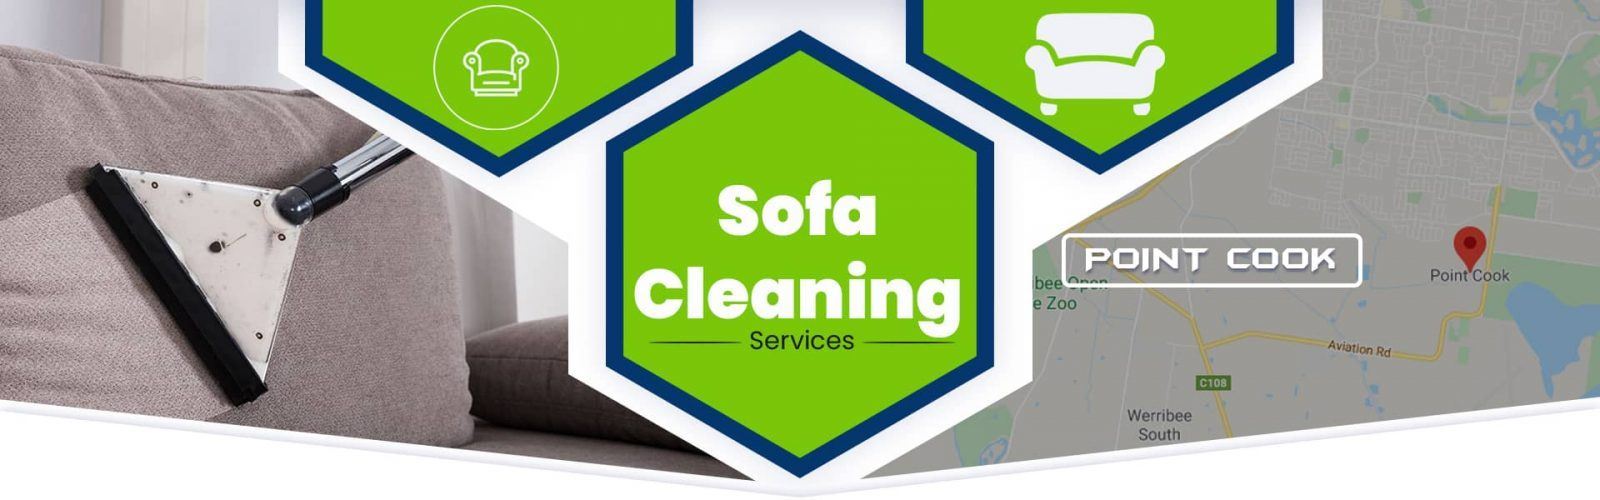 Sofa Cleaning Point Cook